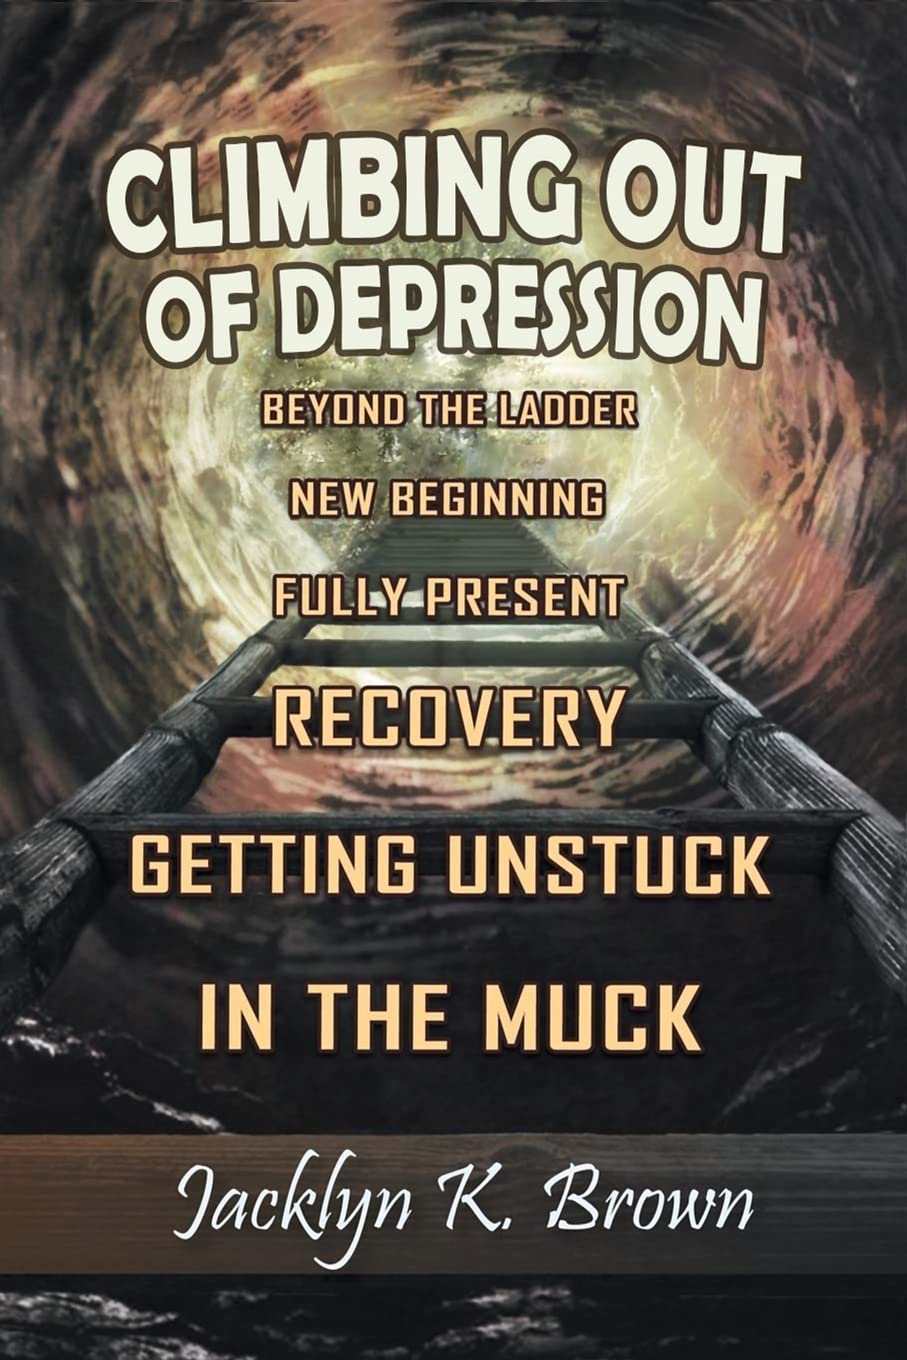 Author's Tranquility Press: New Book Release - Climbing Out of Depression by Jacklyn K. Brown